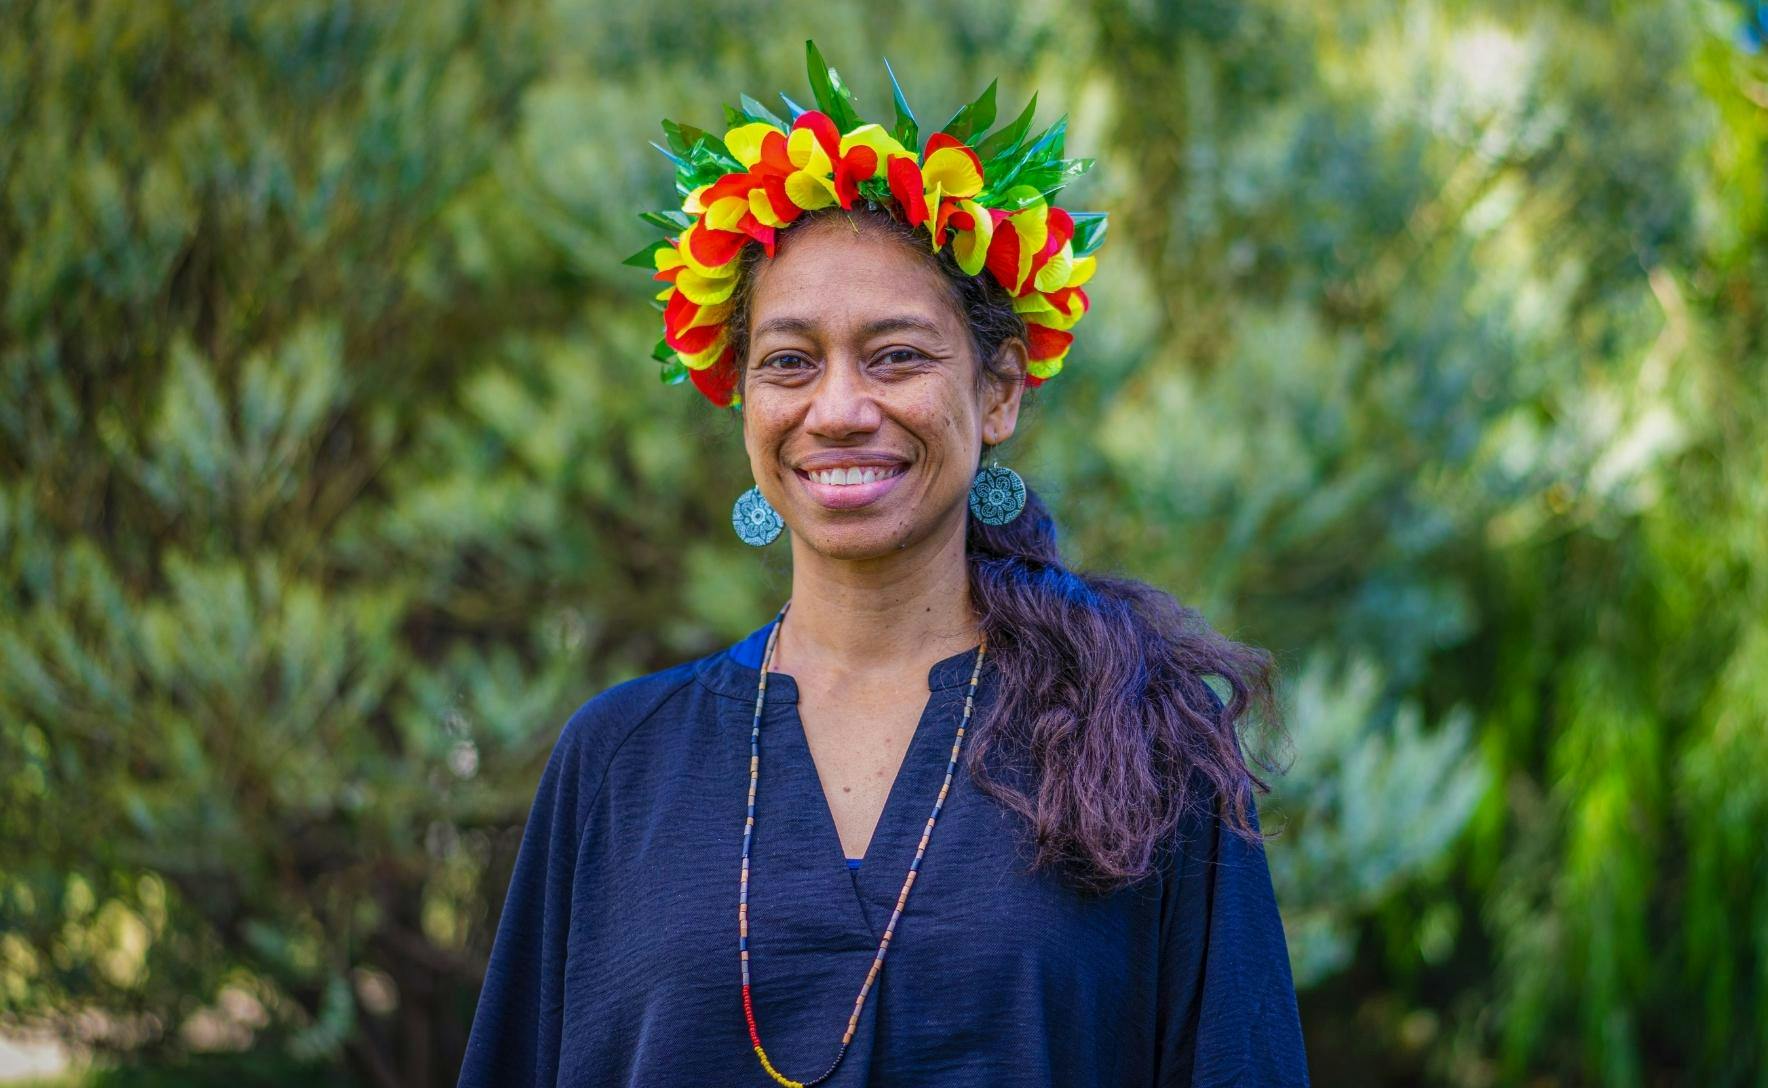 Katerina Teaiwa wears a yellow, red and green head piece, a beaded necklace and bright blue patterned earrings. She stands in front of bright green plants.